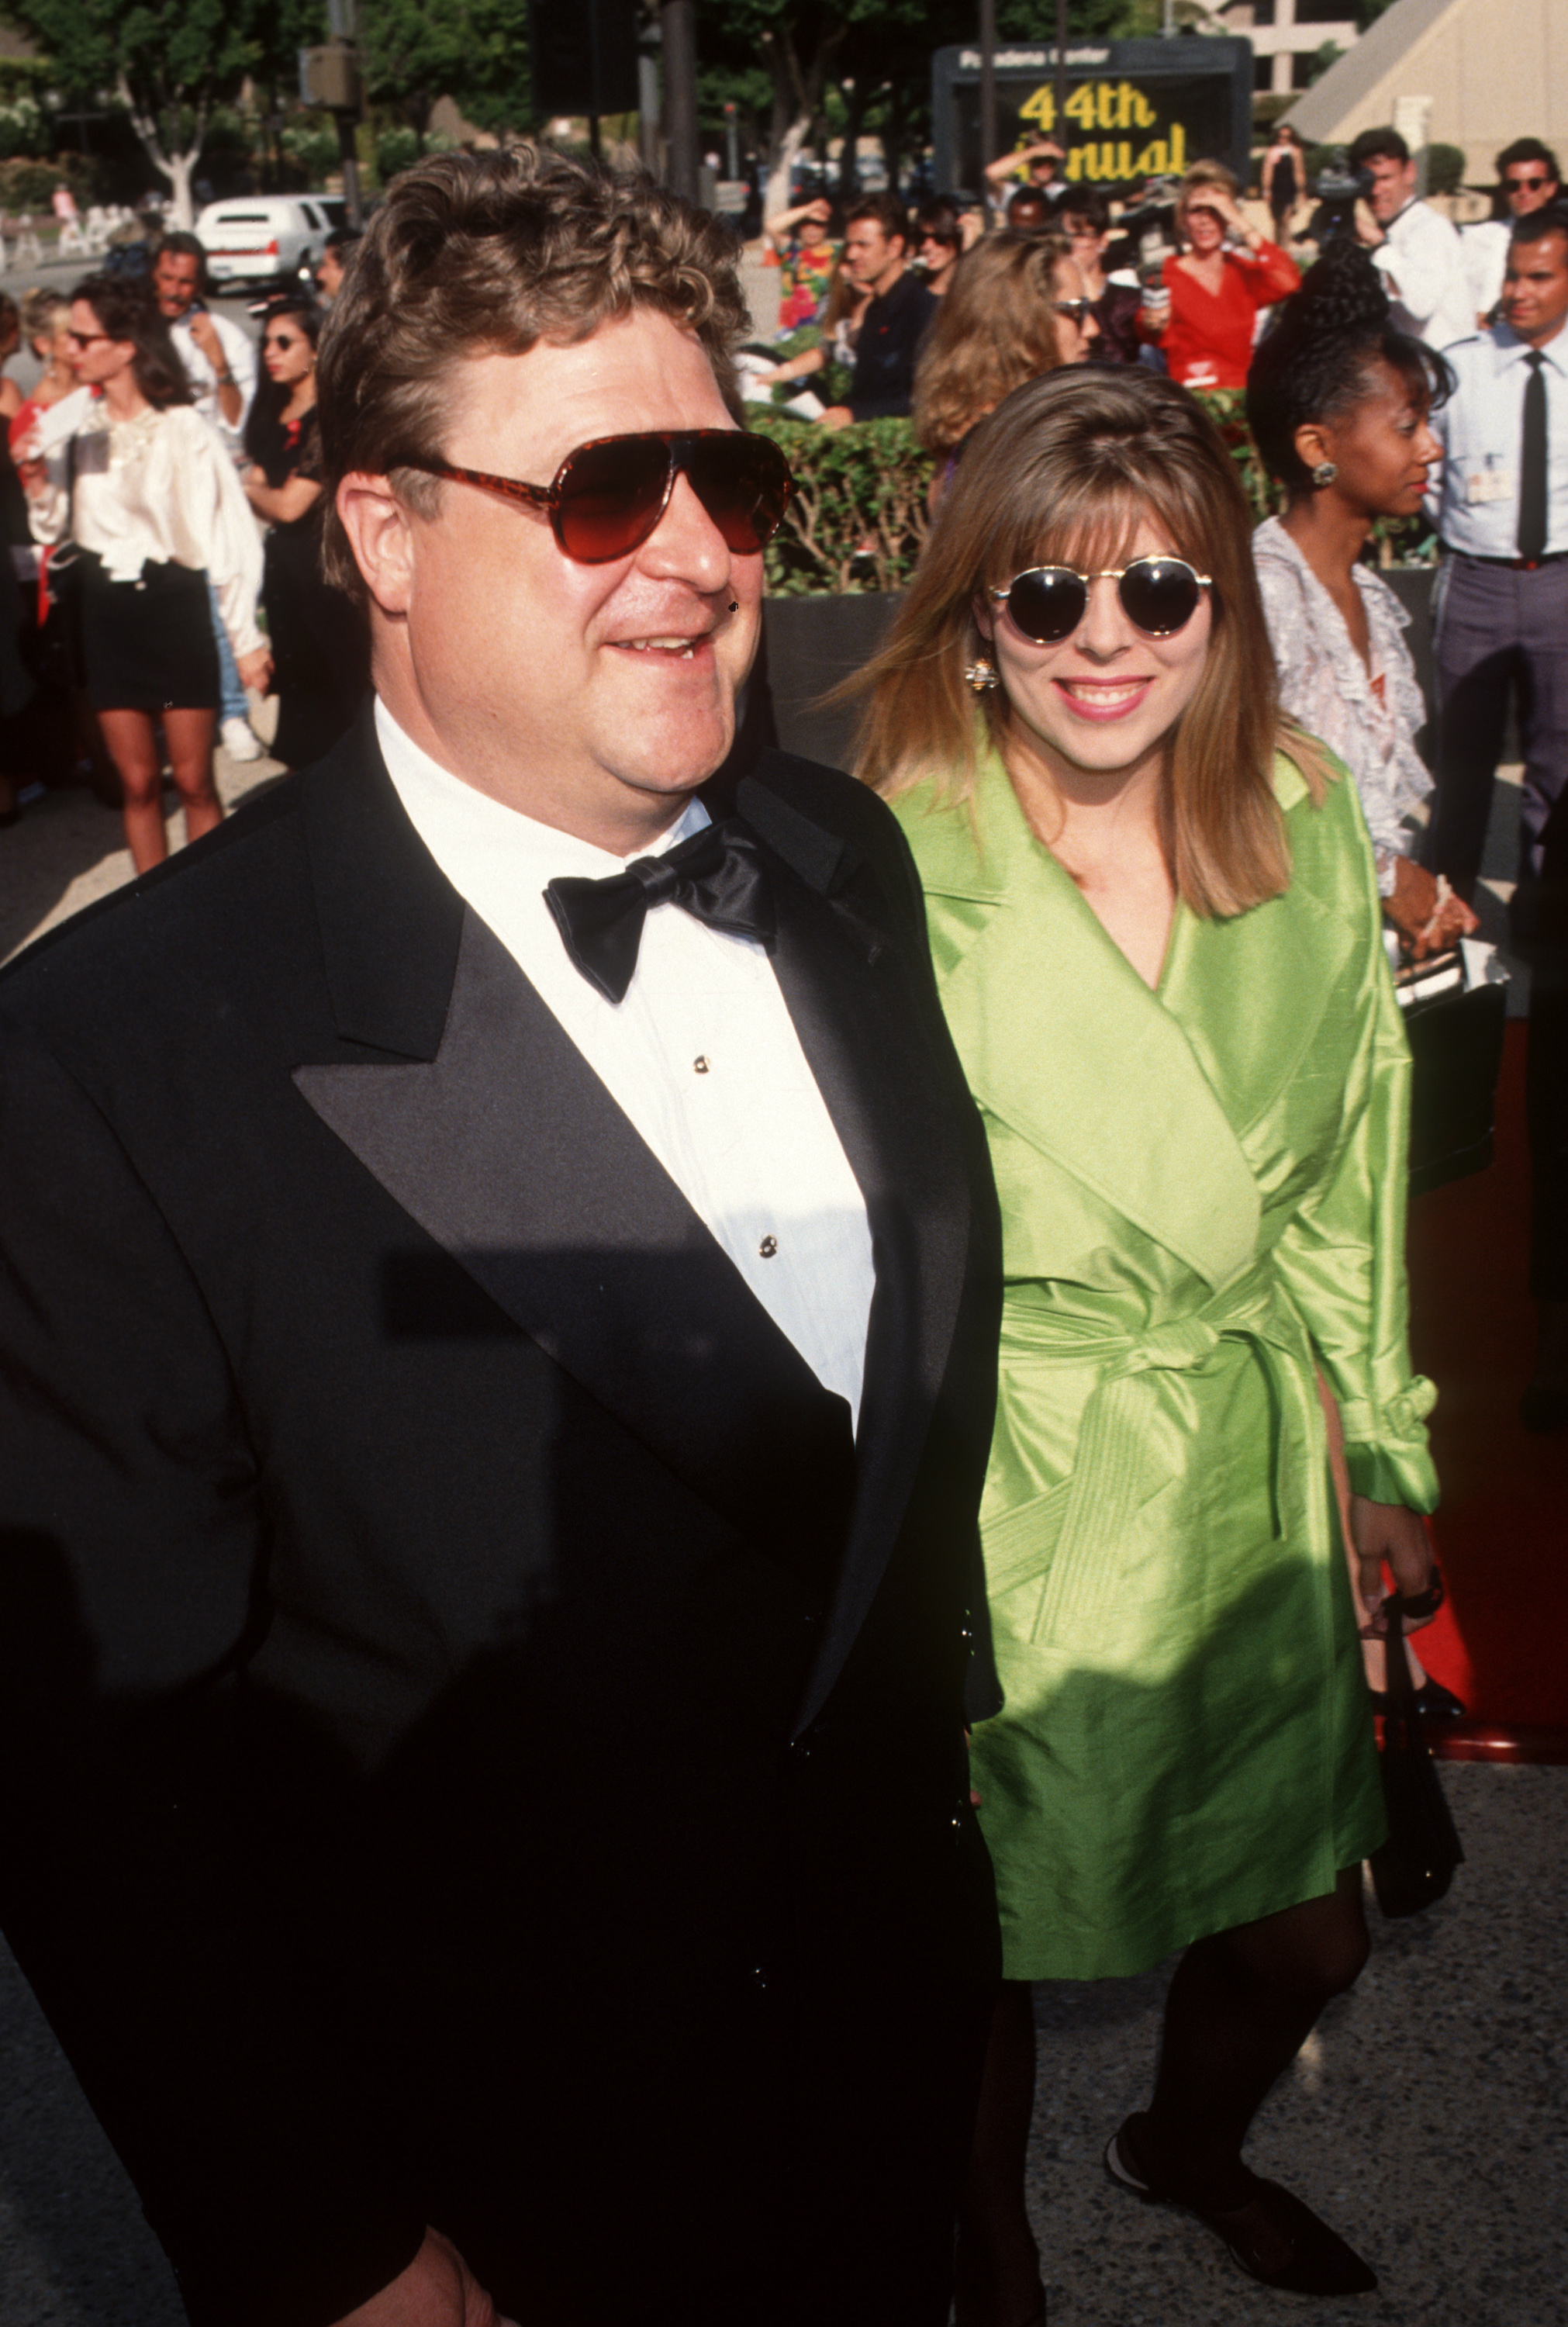 John Goodman and his wife Anna Beth Hartzog attend the 44th Annual Primetime Emmy Awards on August 30, 1992, at Pasadena Civic Auditorium in Pasadena, California. | Source: Getty Images